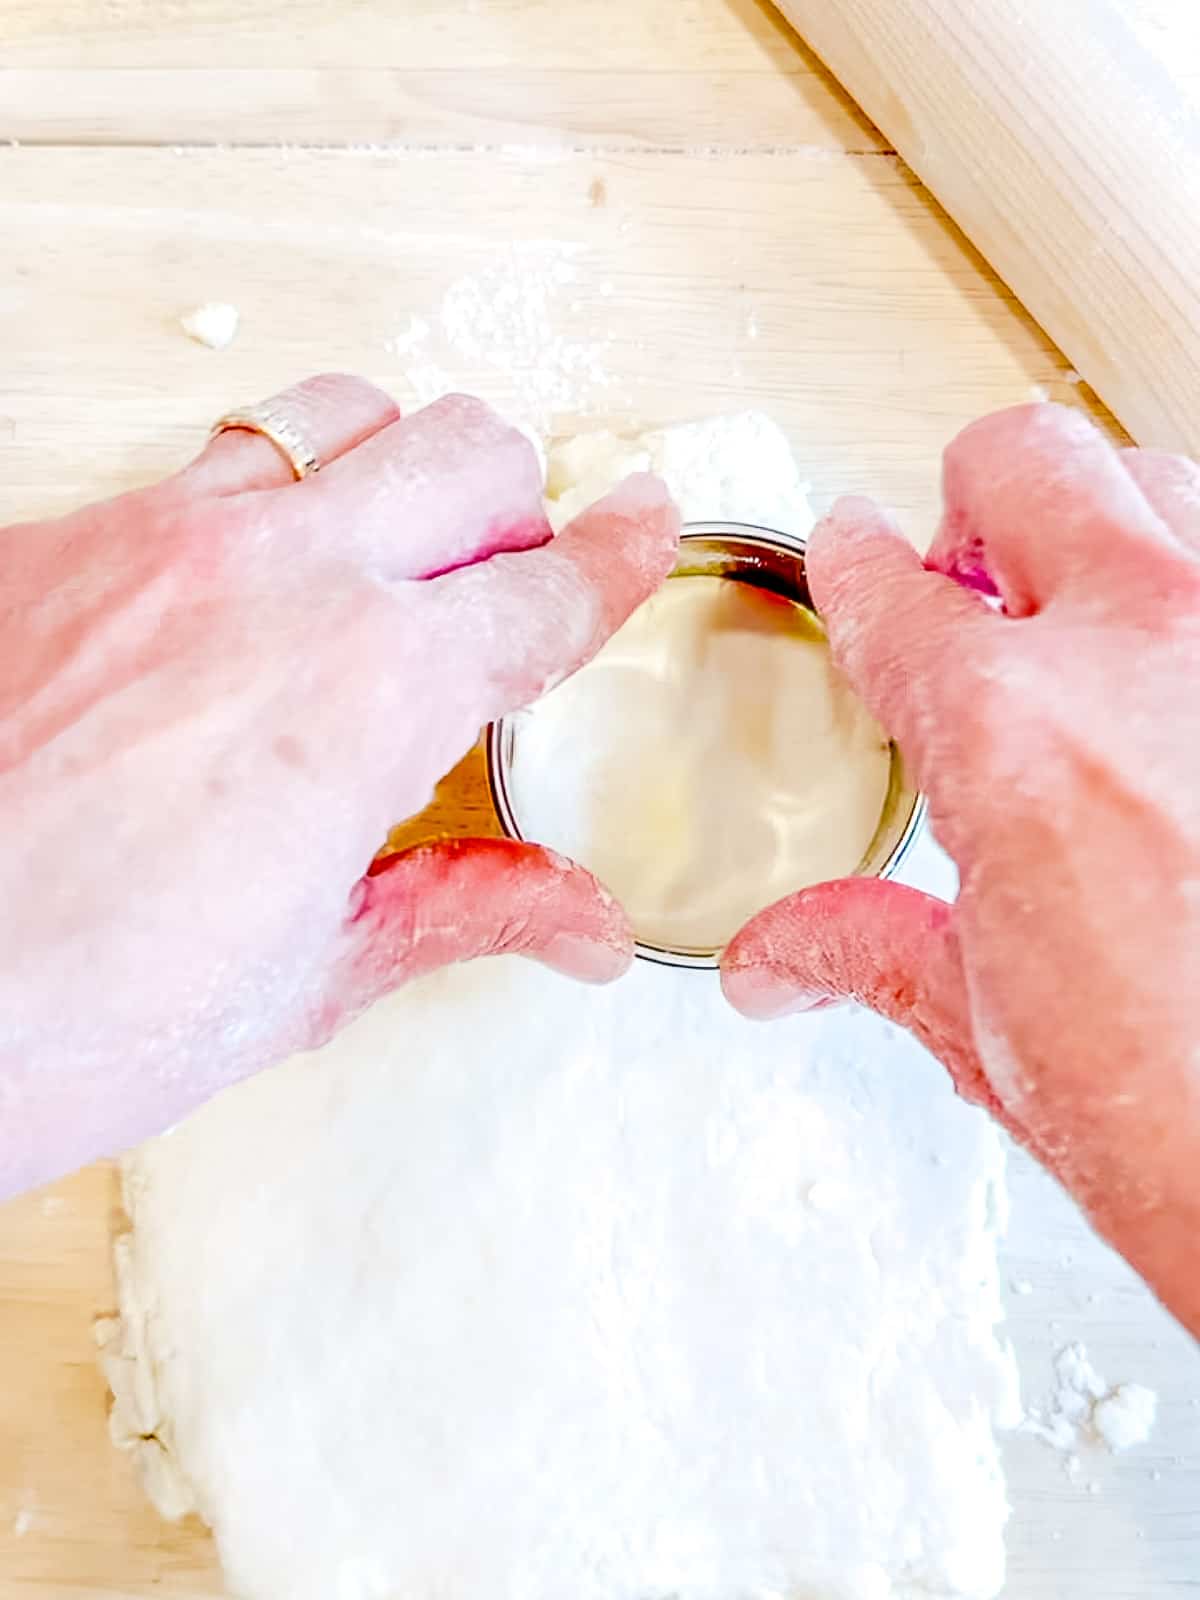 Cutting out easy yogurt biscuits.